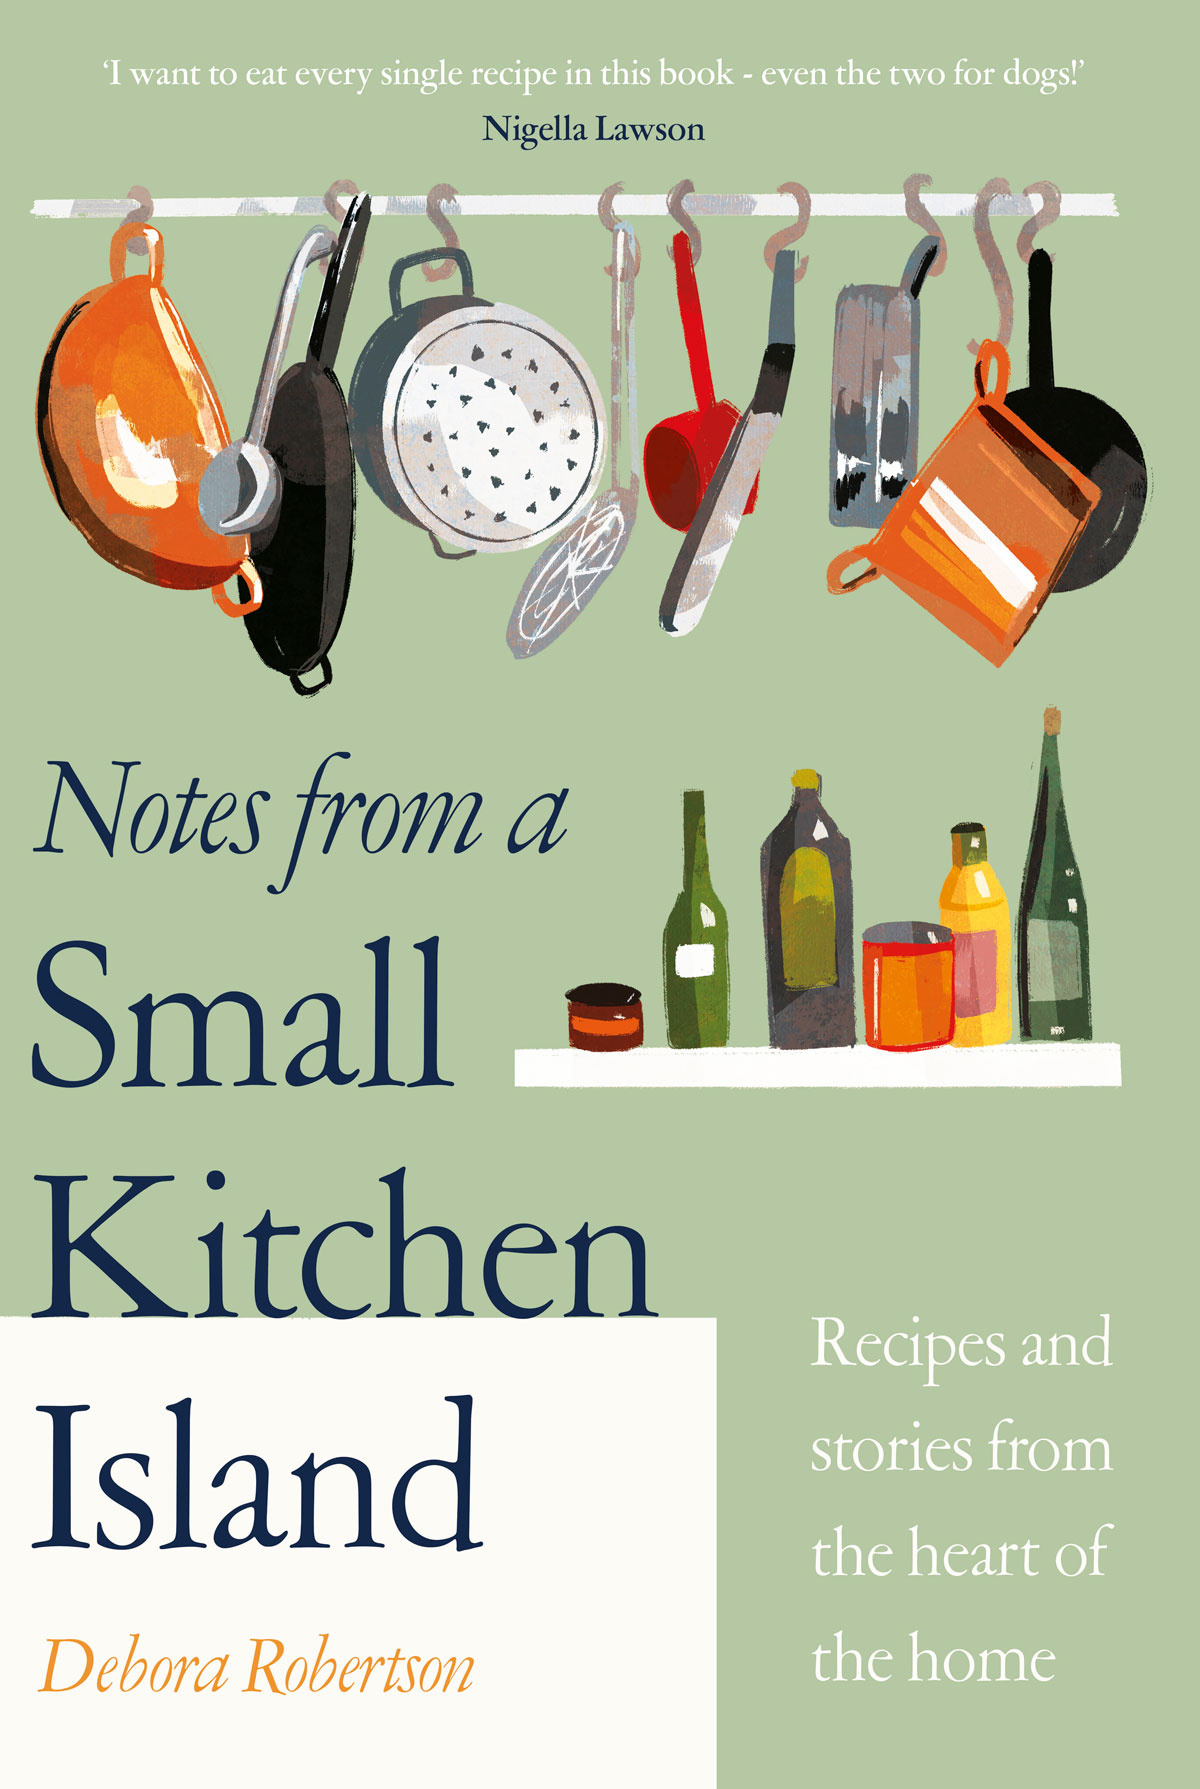 Book cover of Notes from a Small Kitchen Island by Debora Robertson